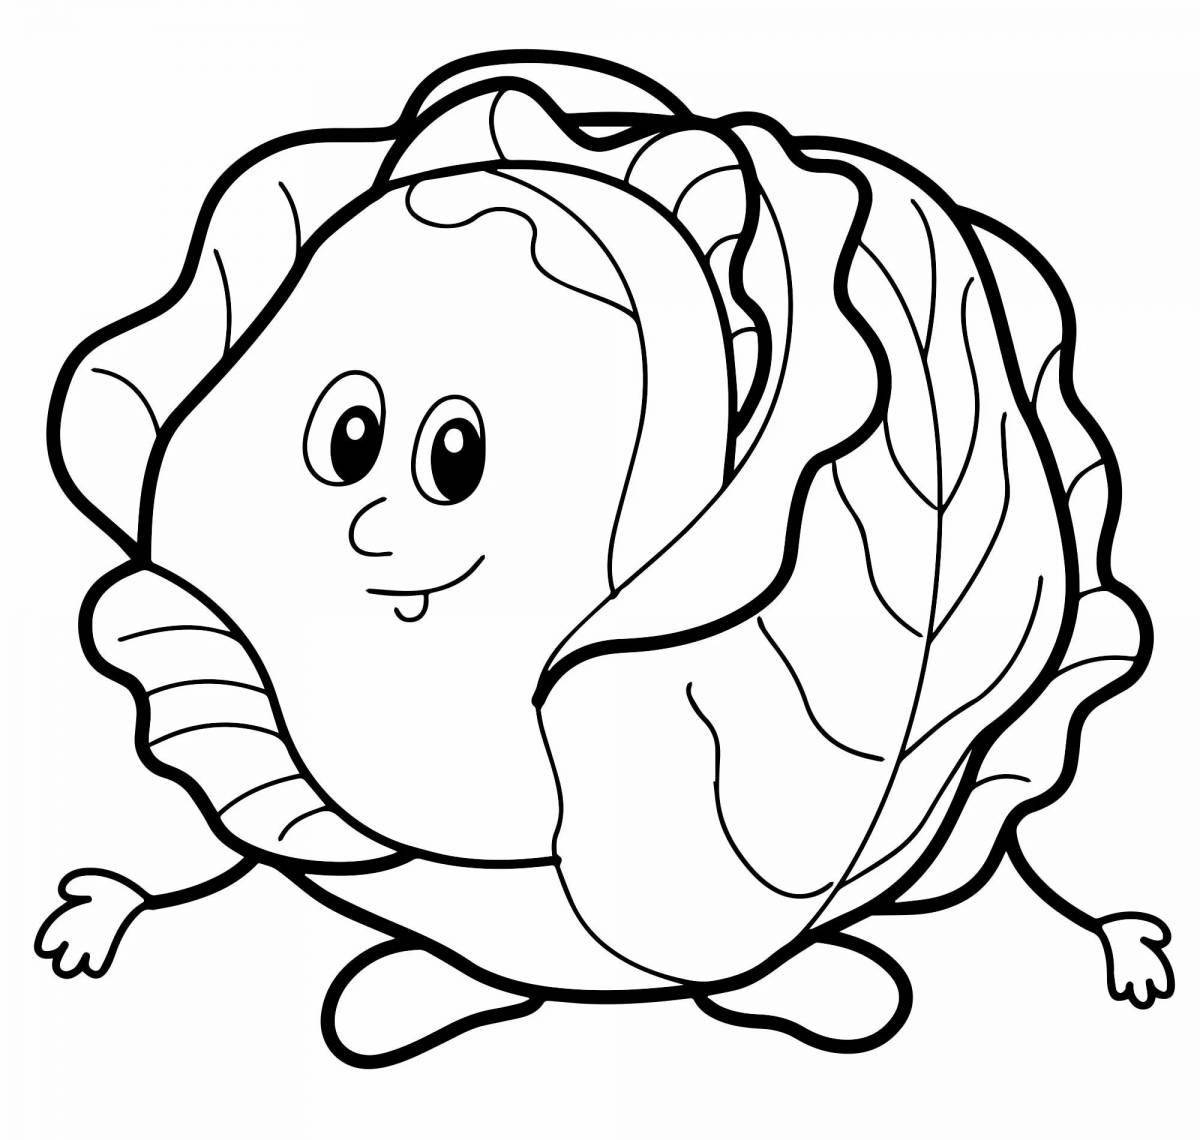 Coloring cute cabbage for kids